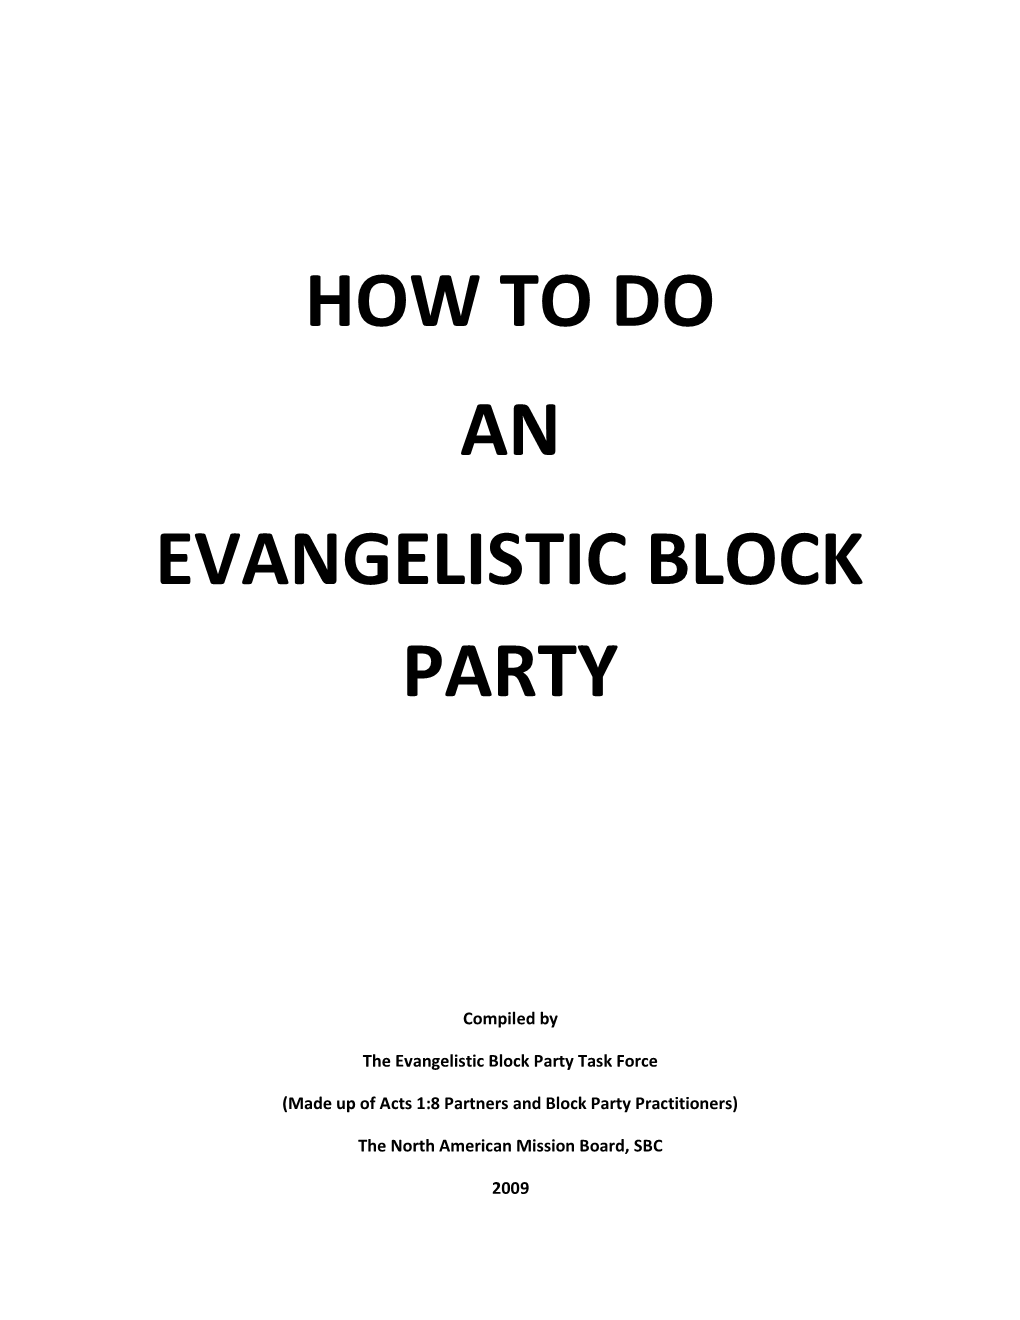 How to Do an Evangelistic Block Party